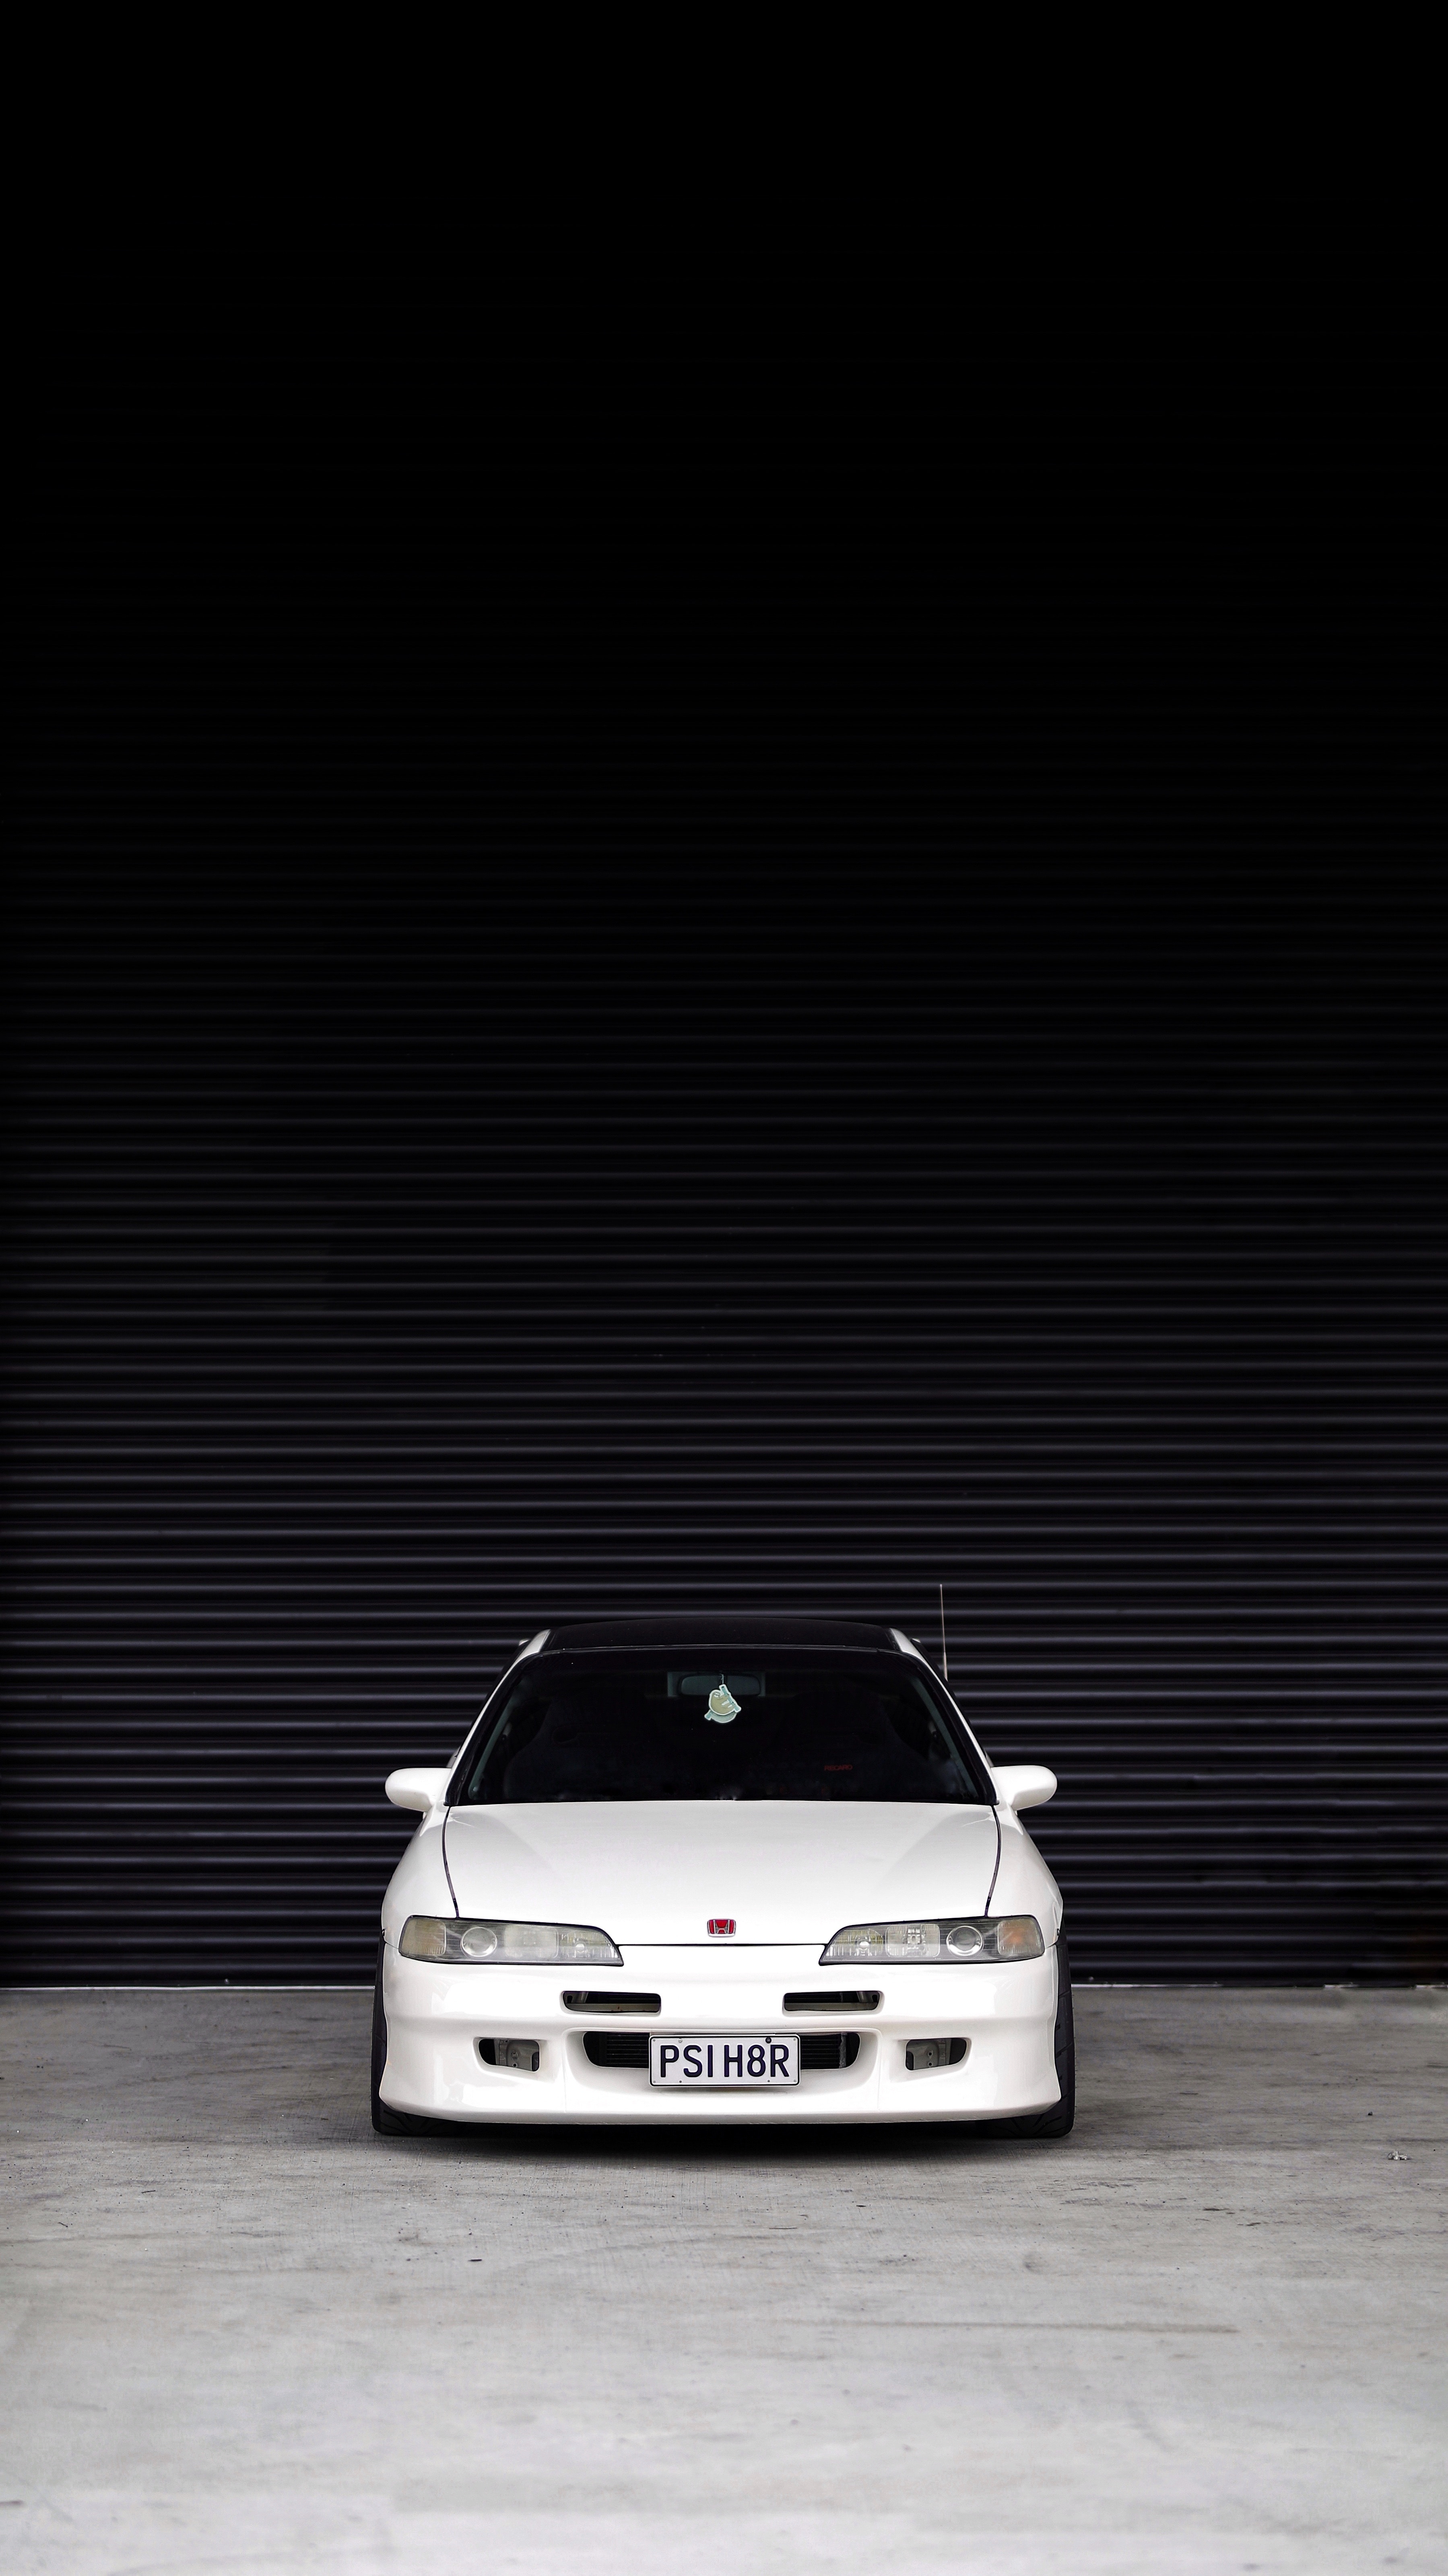 90080 Screensavers and Wallpapers Honda for phone. Download honda, cars, white, front view, honda type r, honda integra pictures for free